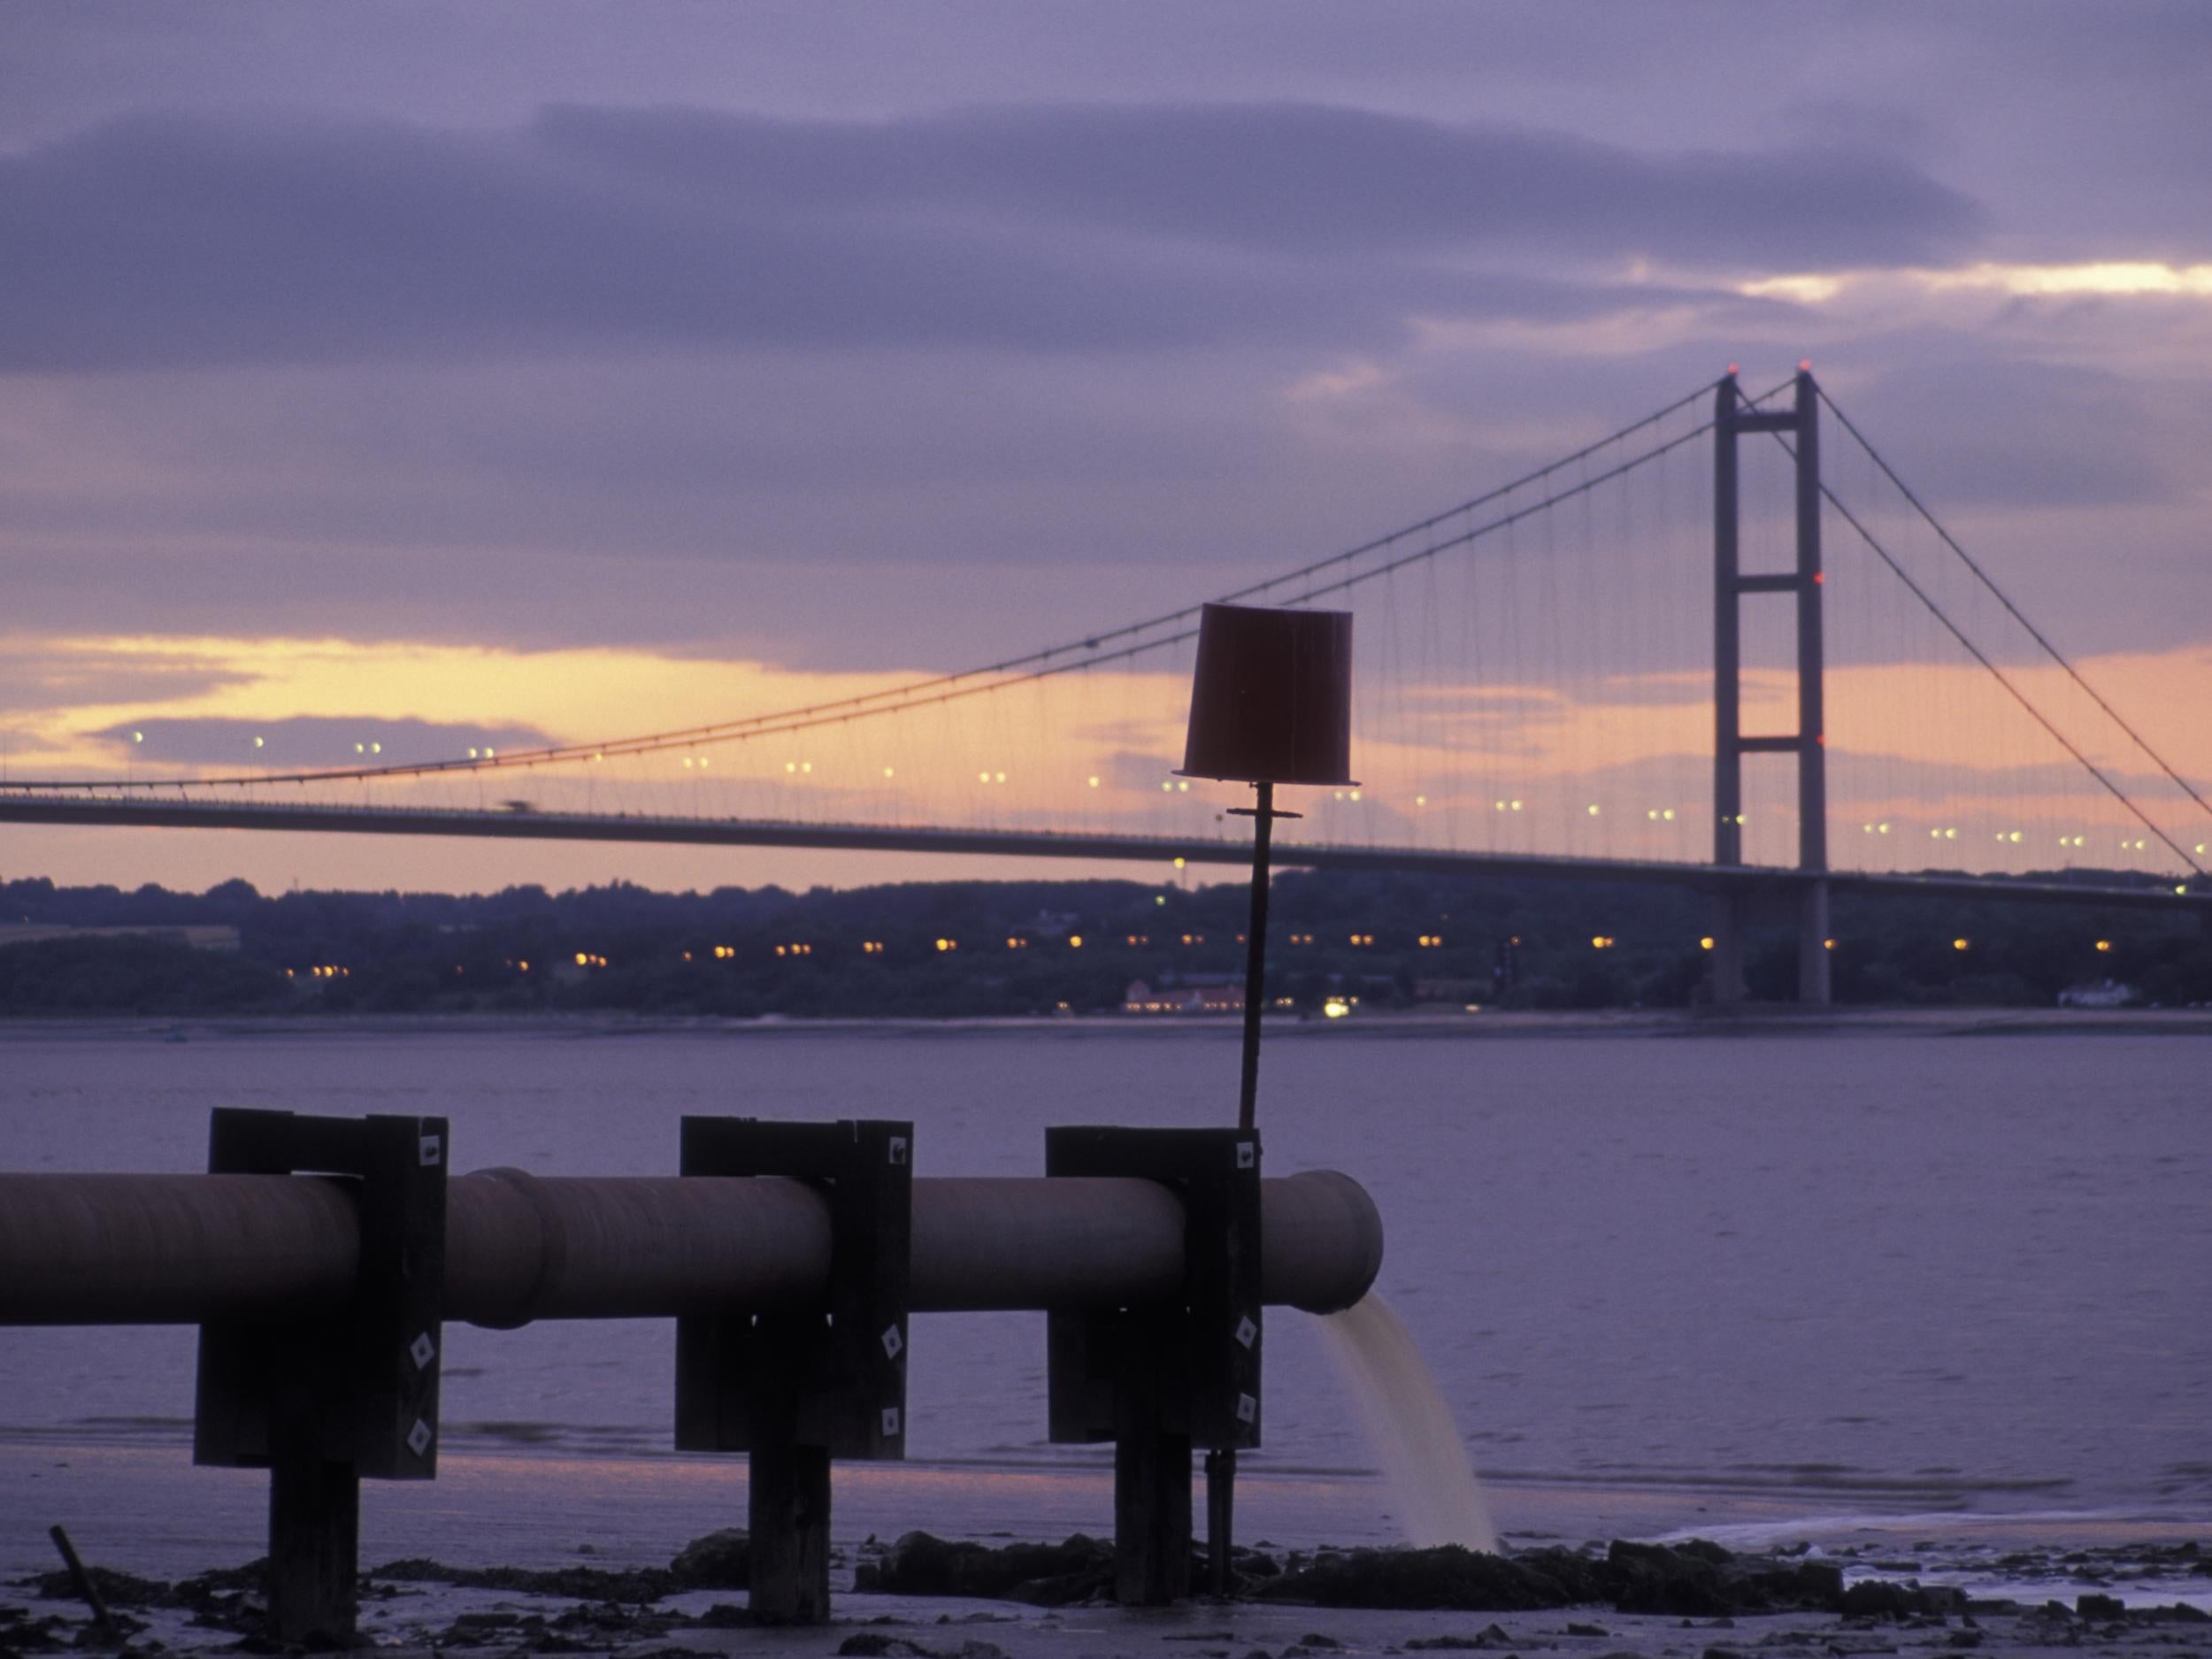 Sewage outflow into the River Humber in the North-east of England